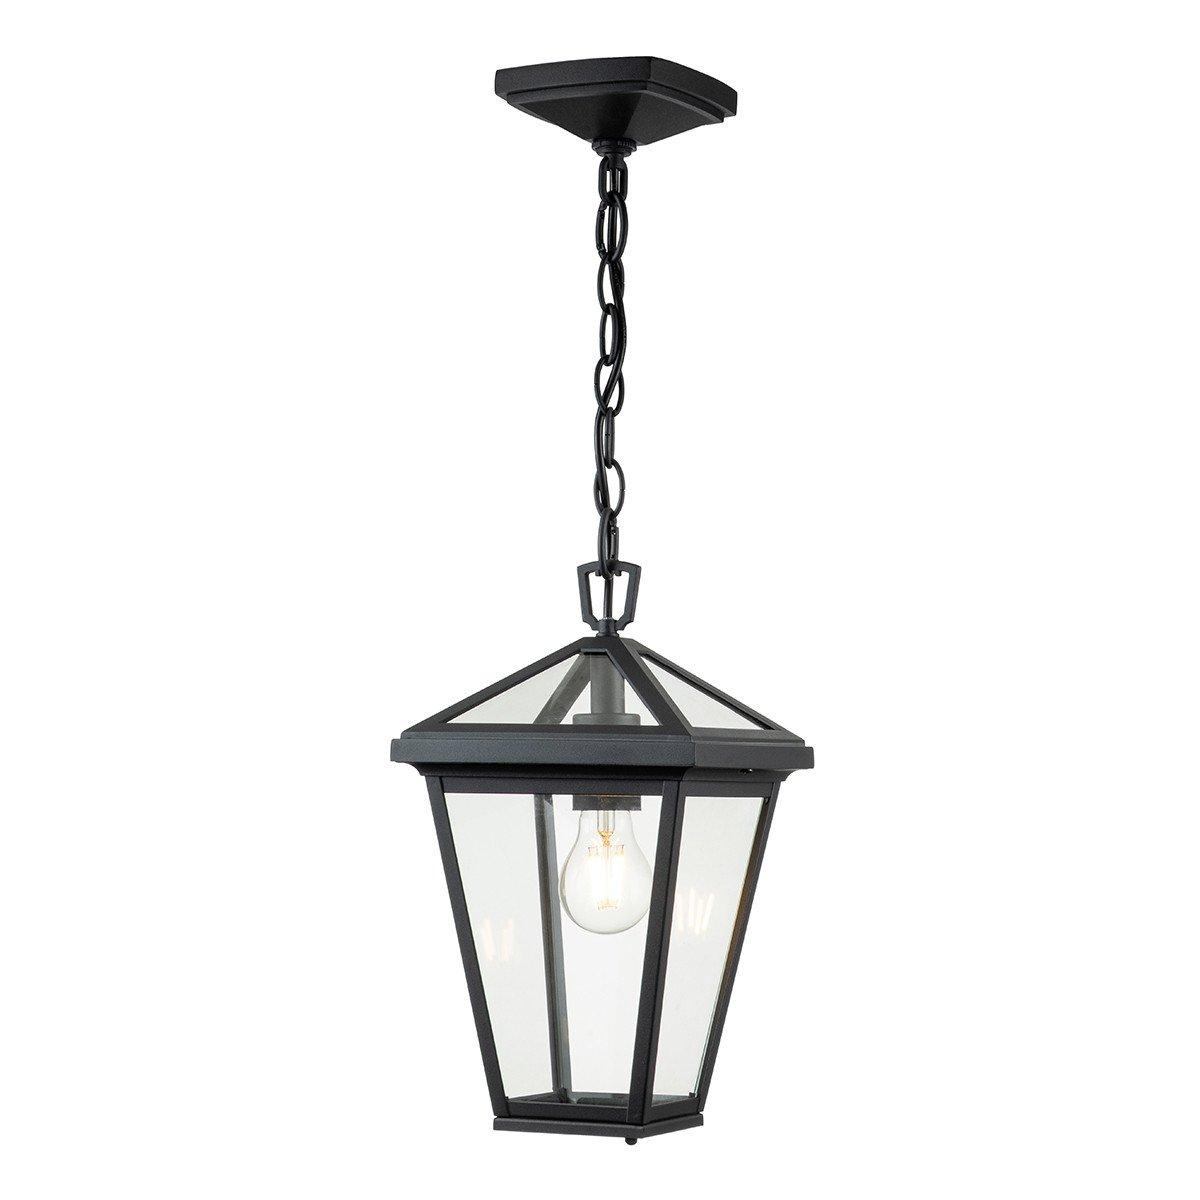 Hinkley Alford Place Outdoor Pendant Ceiling Light Museum Black IP44